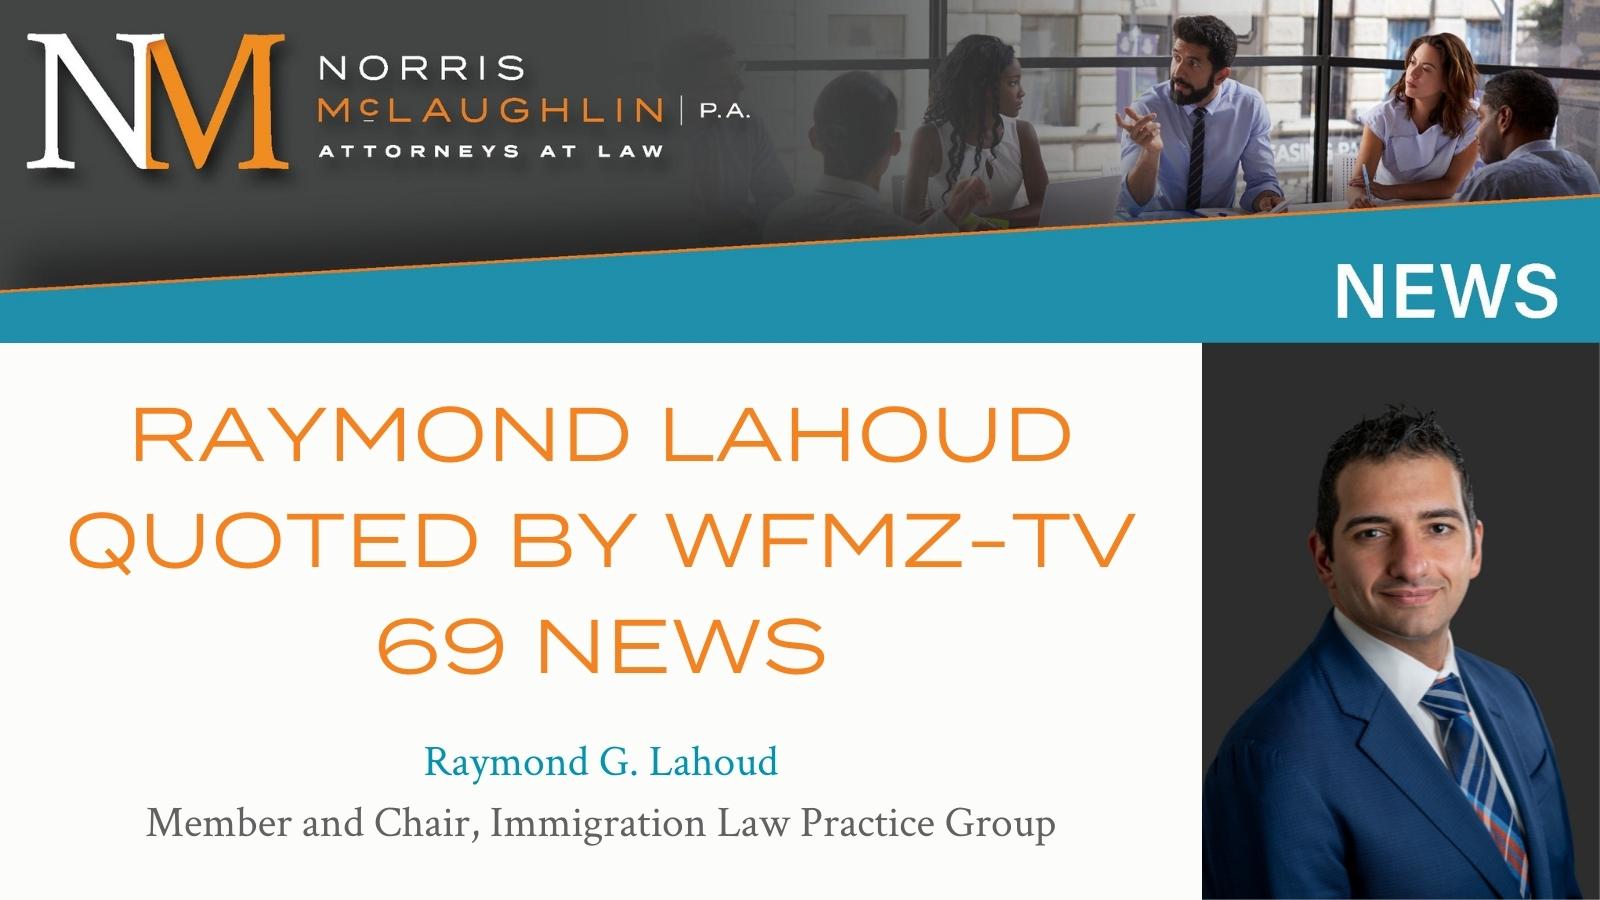 Raymond Lahoud Quoted by WFMZ-TV 69 News